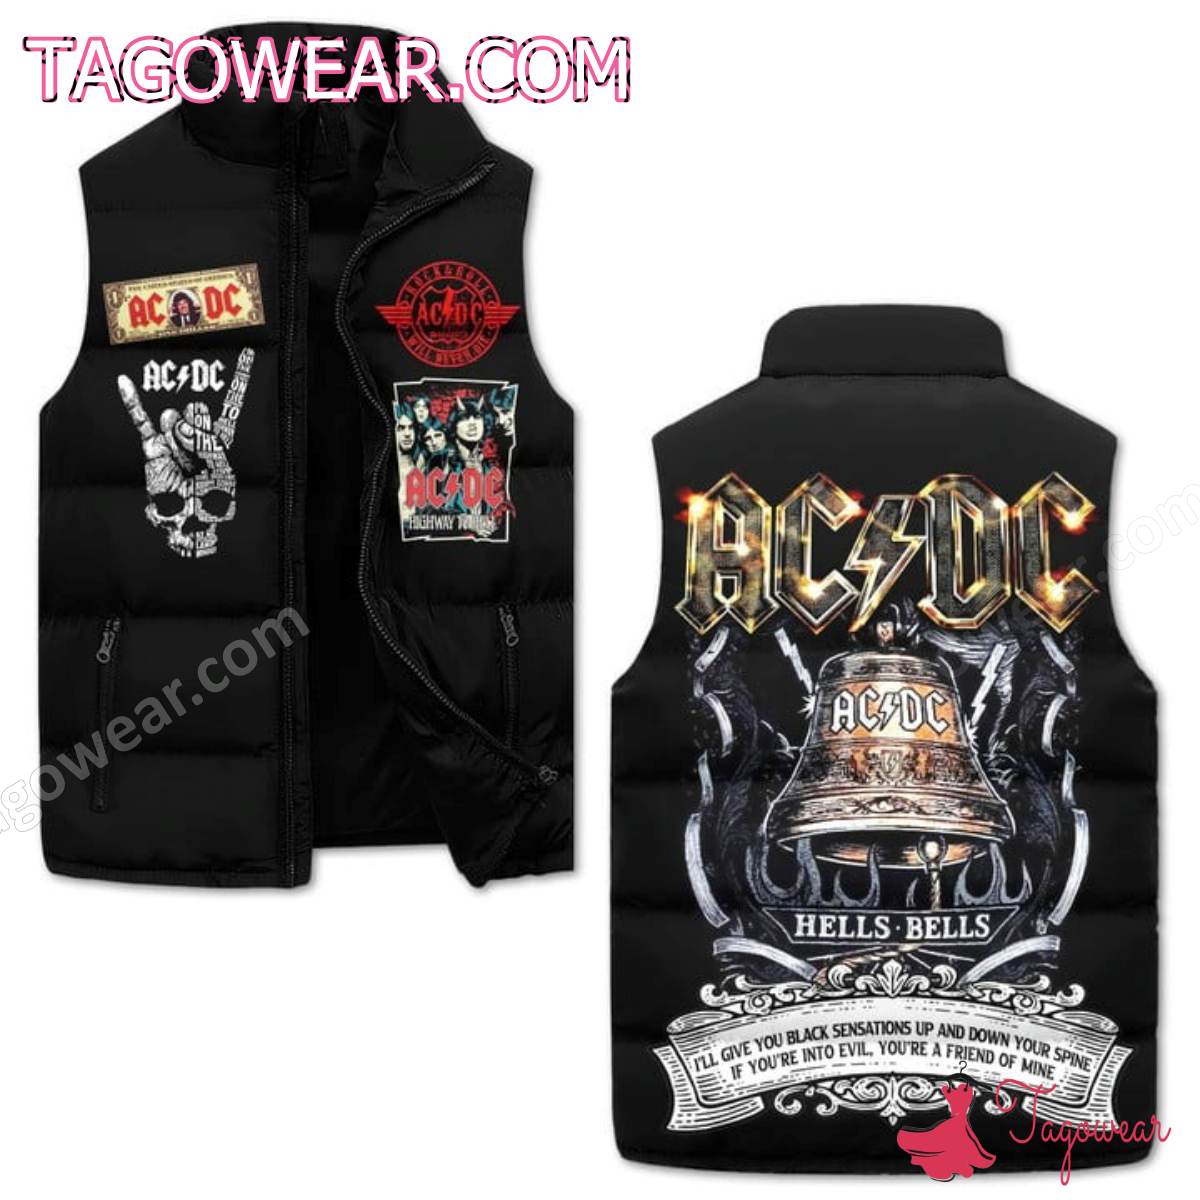 Ac Dc Hells Bells I'll Give You Black Sensations Up And Down Your Spine Puffer Vest